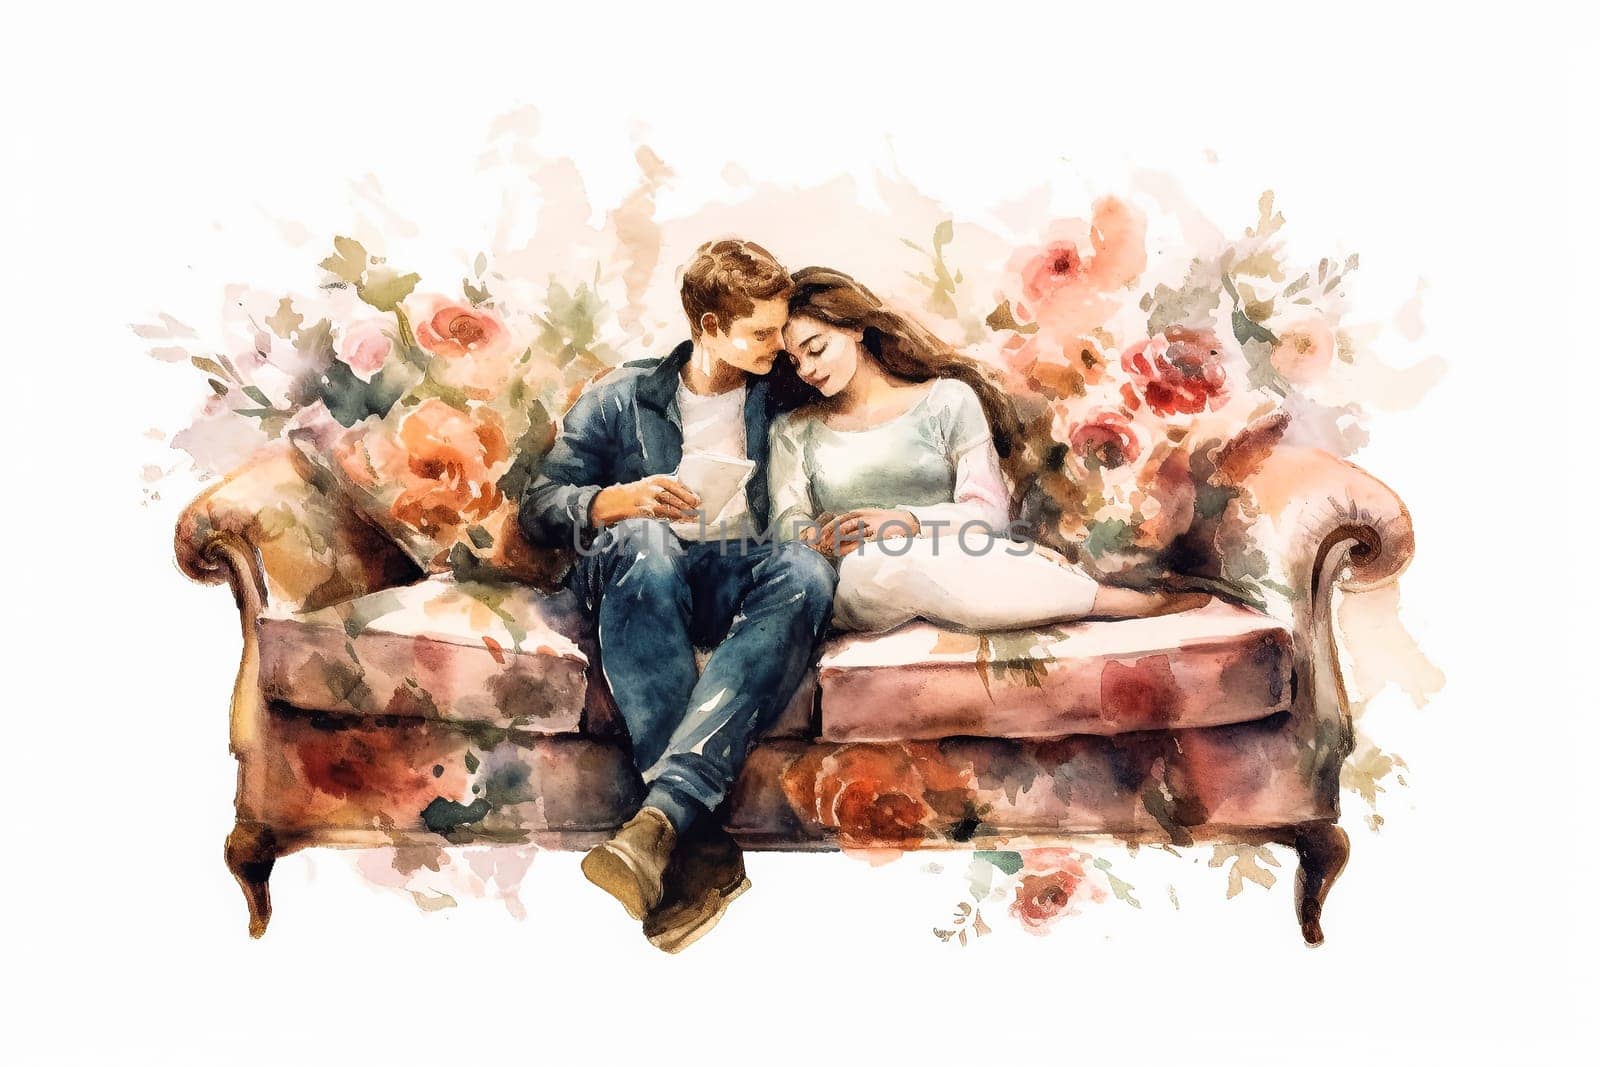 Embrace the warmth of love with a watercolor illustration of a couple in a tender hug on the sofa. The art captures the intimate essence of a romantic date.